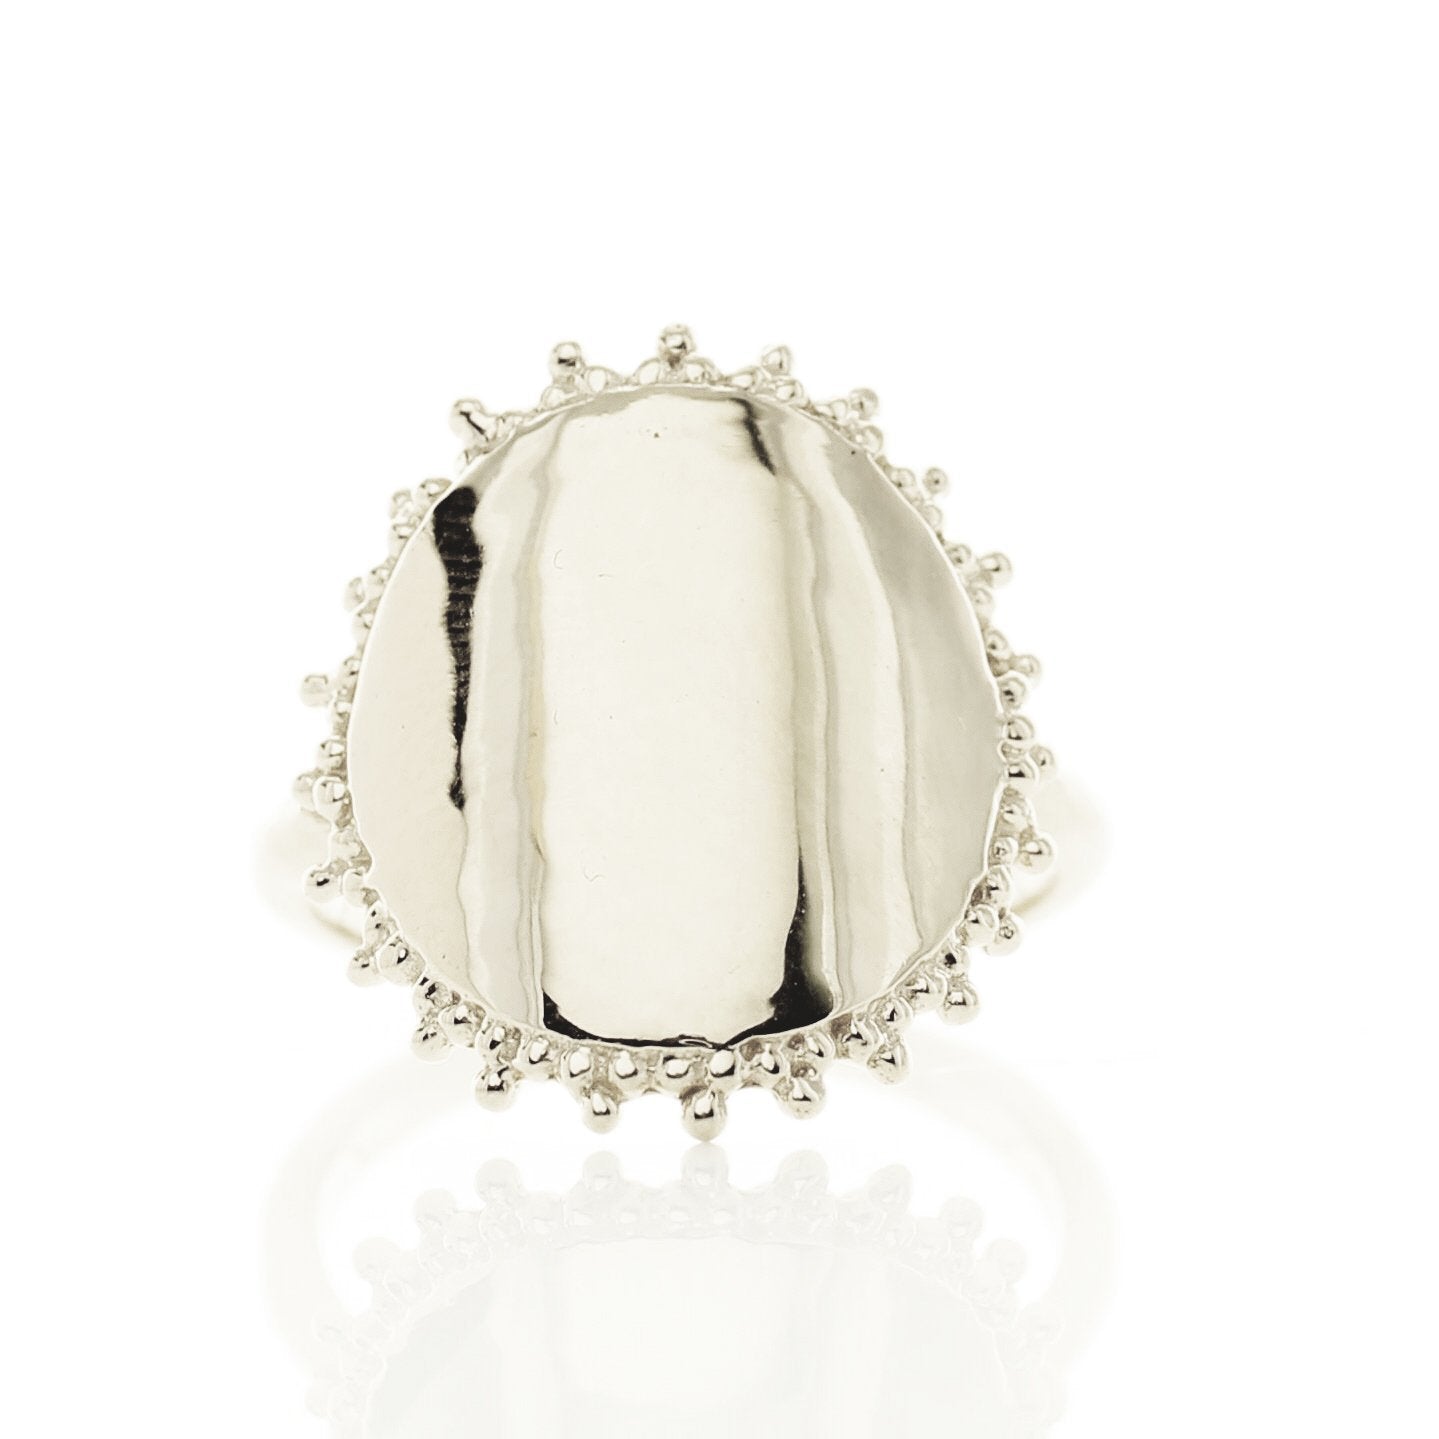 BELIEVE SOLEIL RING - SILVER - SO PRETTY CARA COTTER